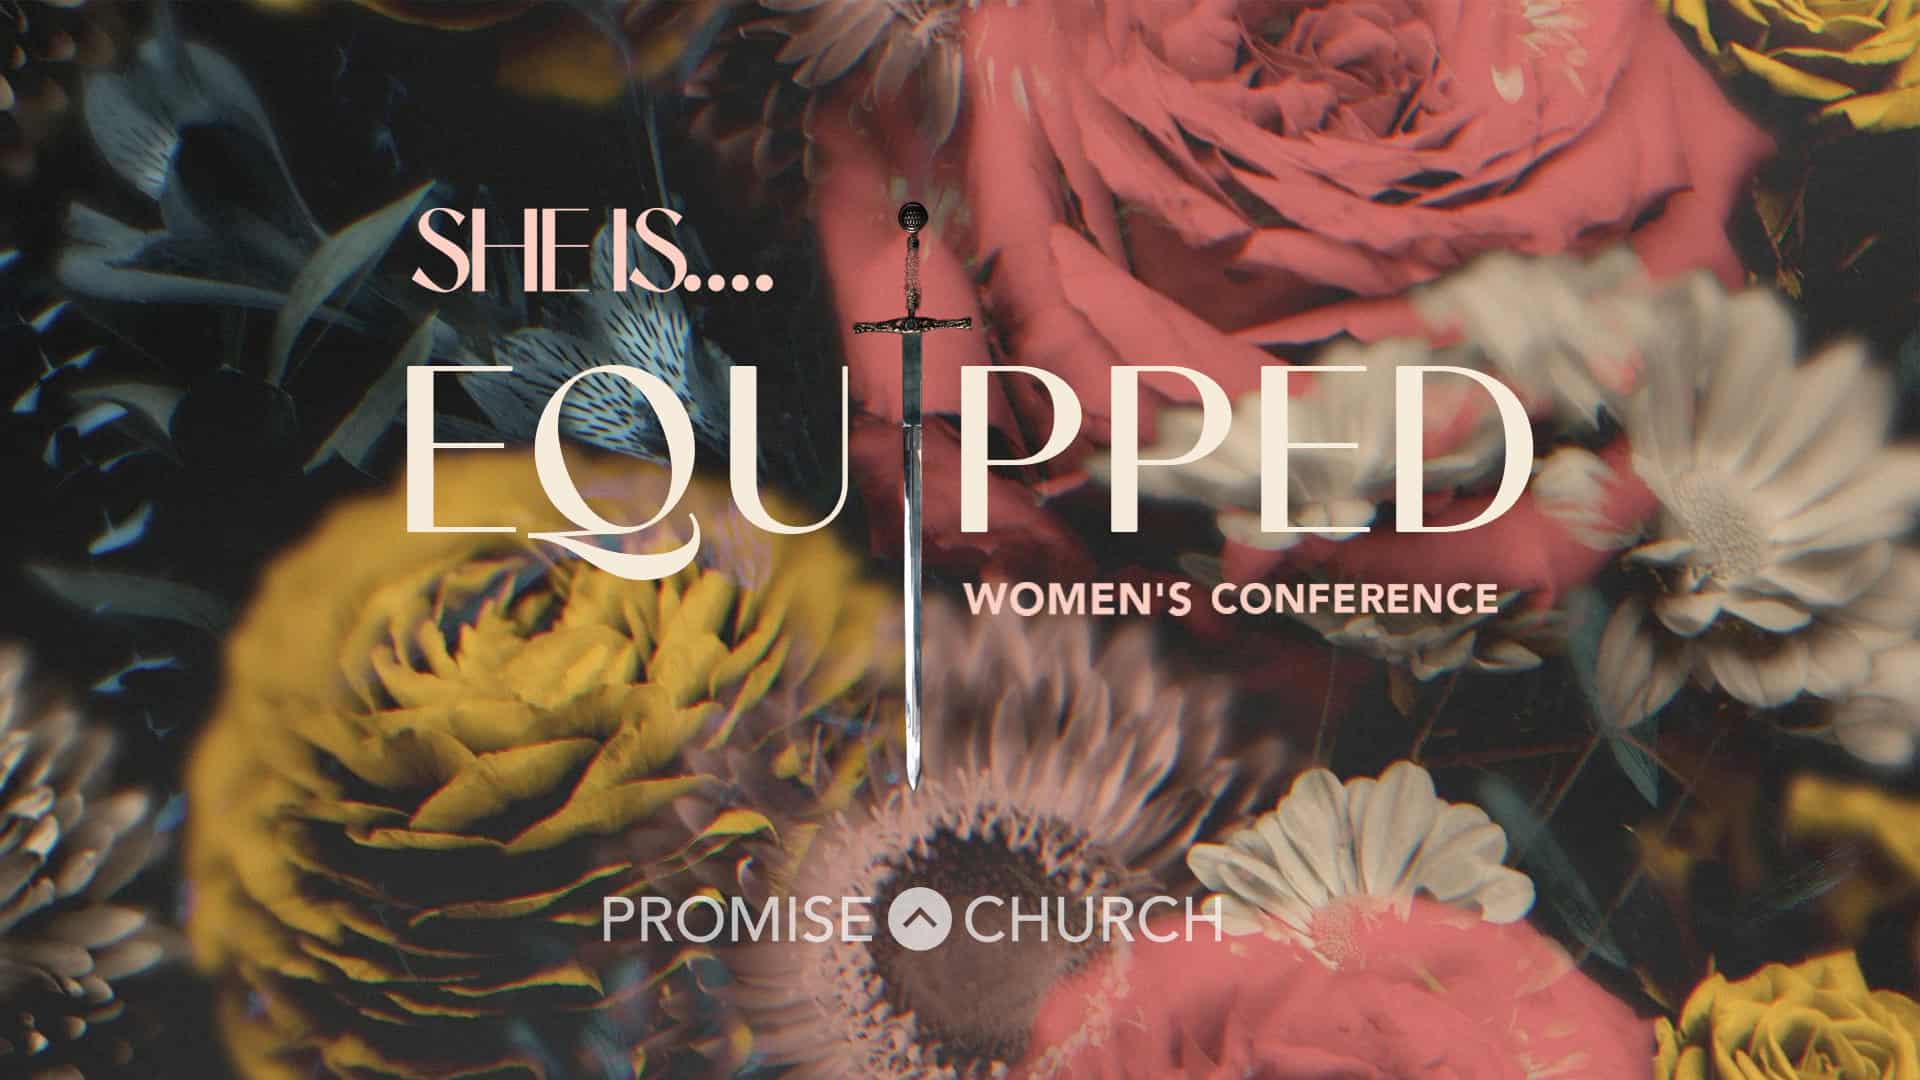 SHE IS ... EQUPPED WOMEN'S CONFERENCE